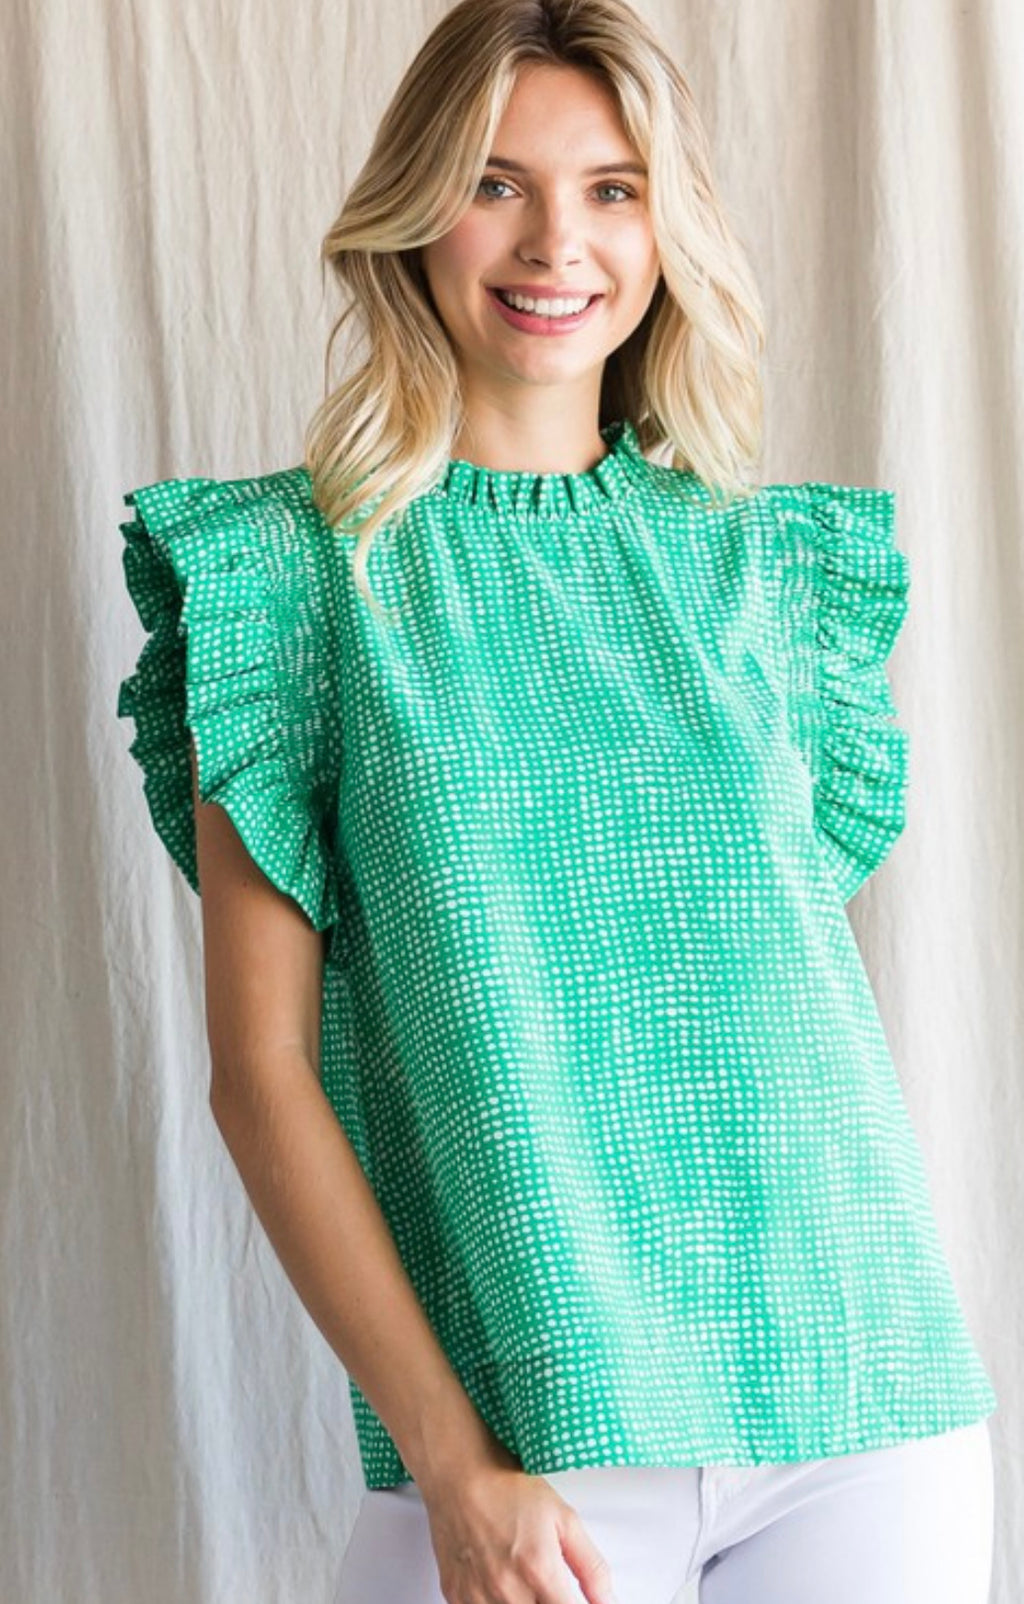 Gorgeous, green dotted top